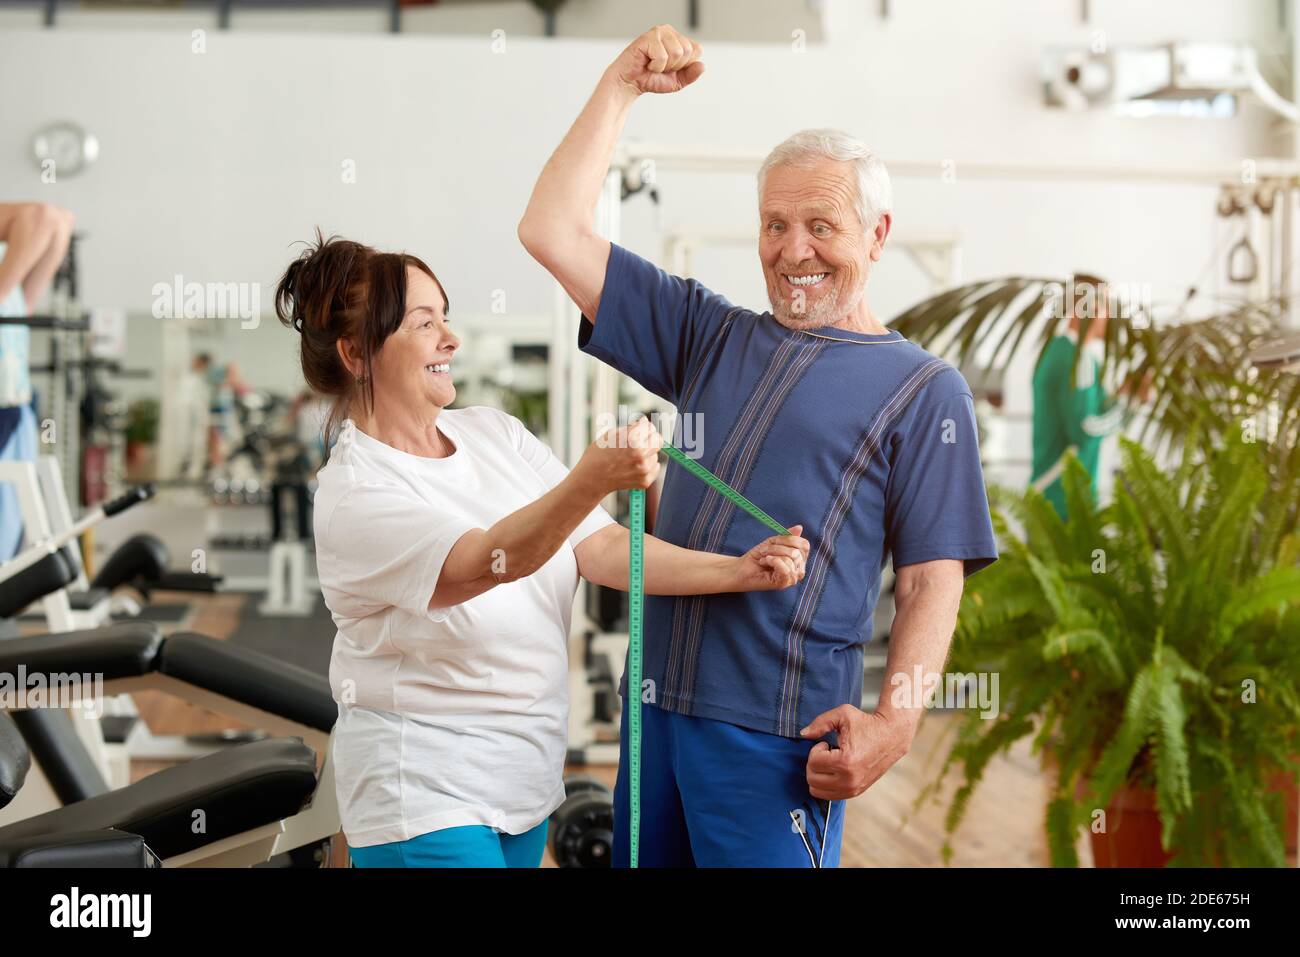 Funny senior man flexing his muscles at gym. Stock Photo